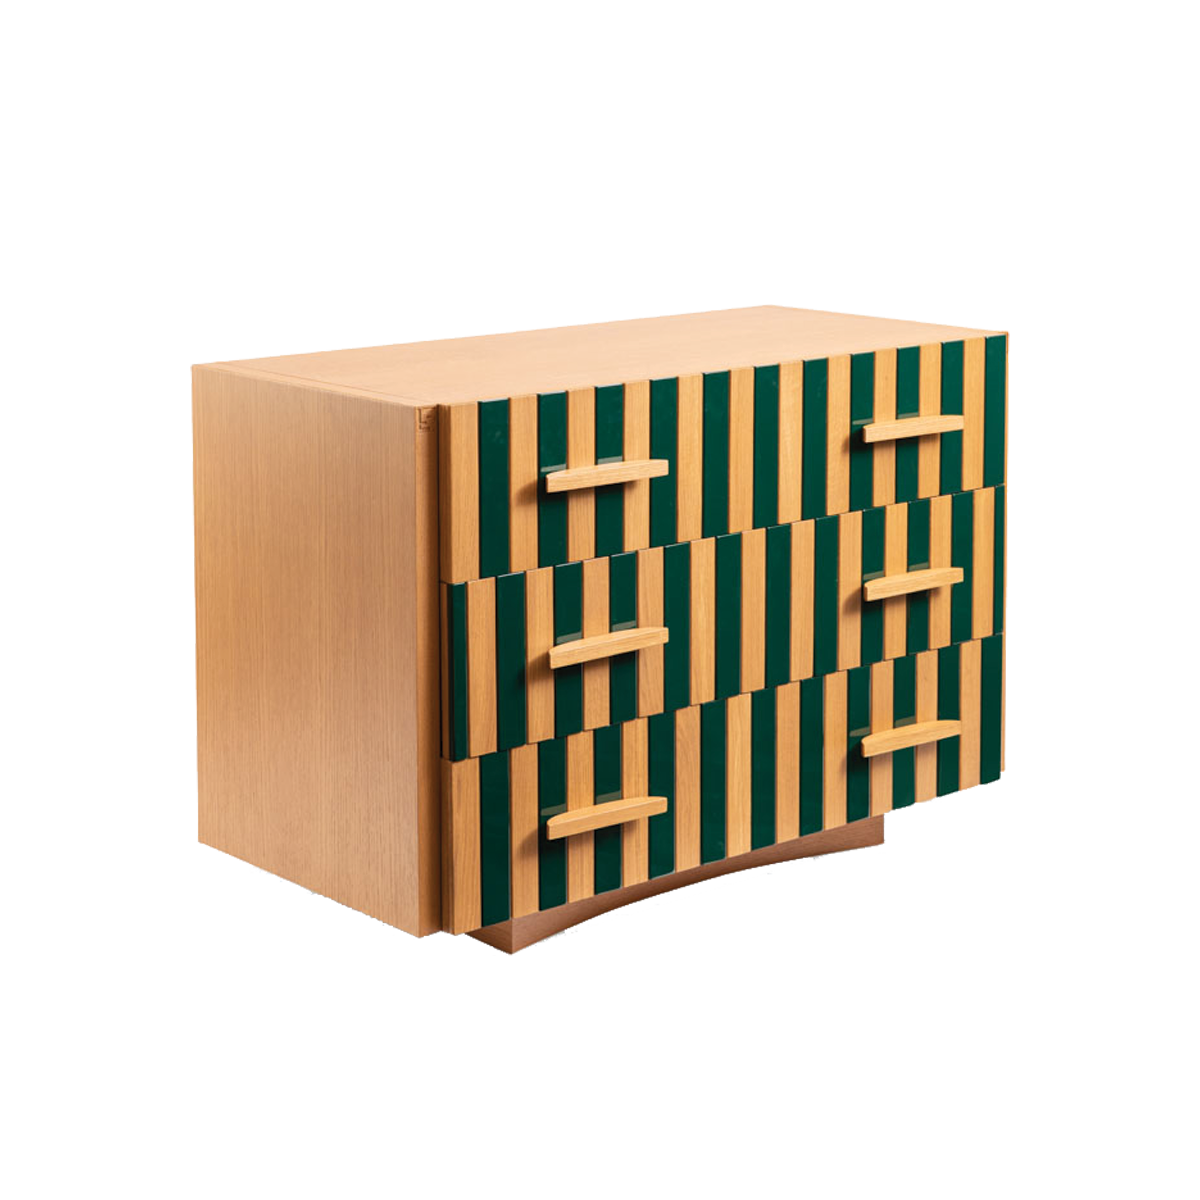 Mirage Chest of Drawers